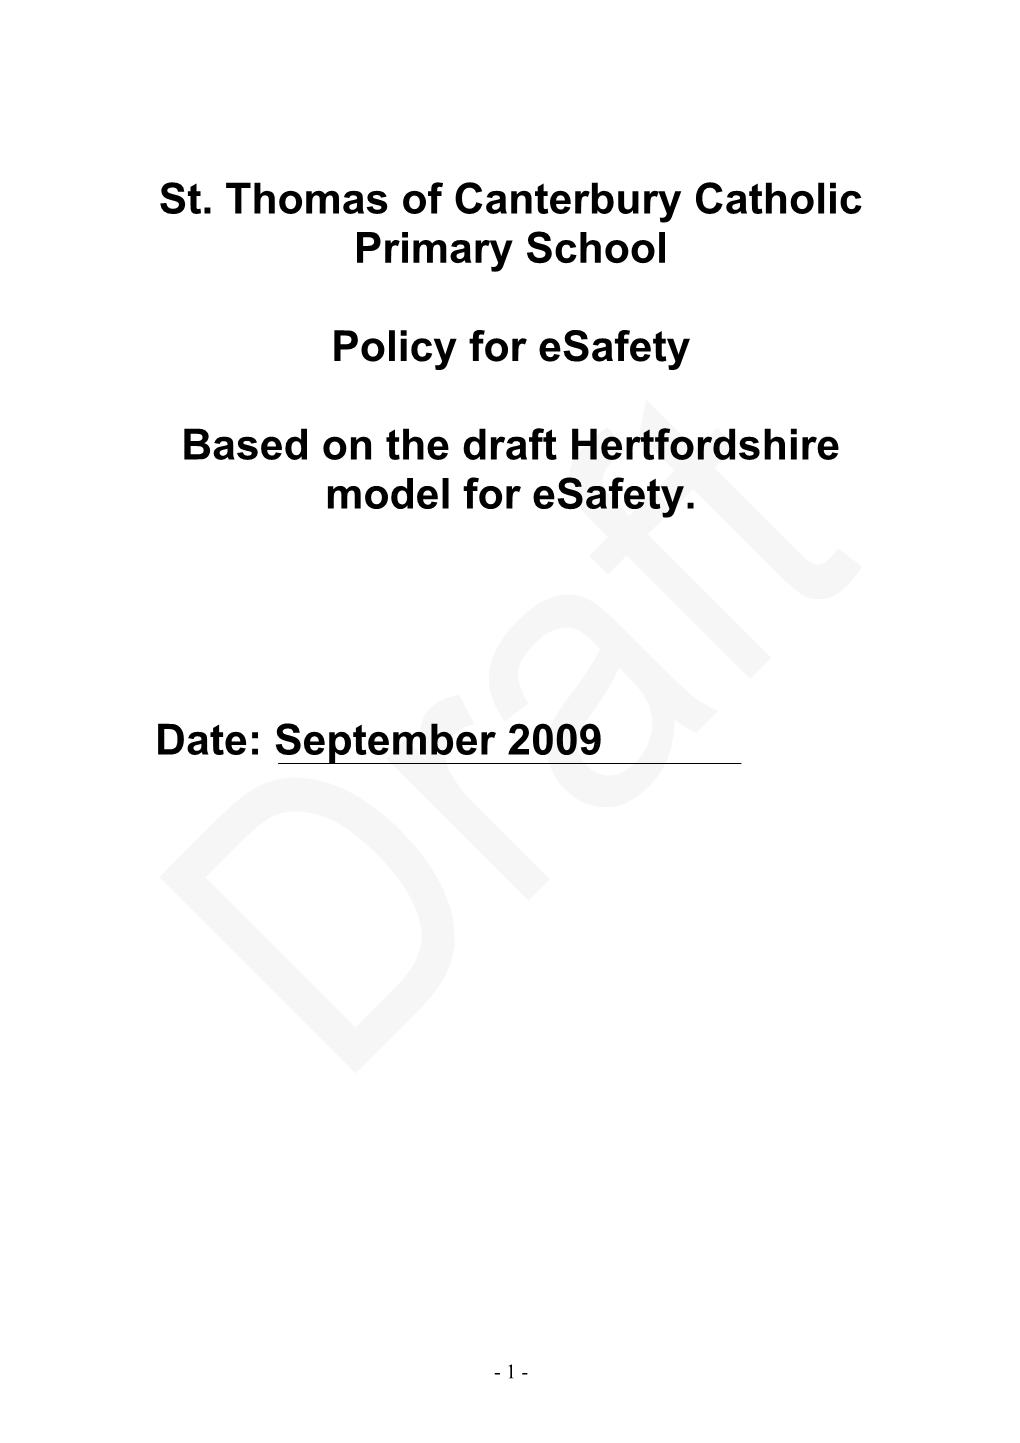 School Policy for Esafety Based on the Draft Model for Esafety